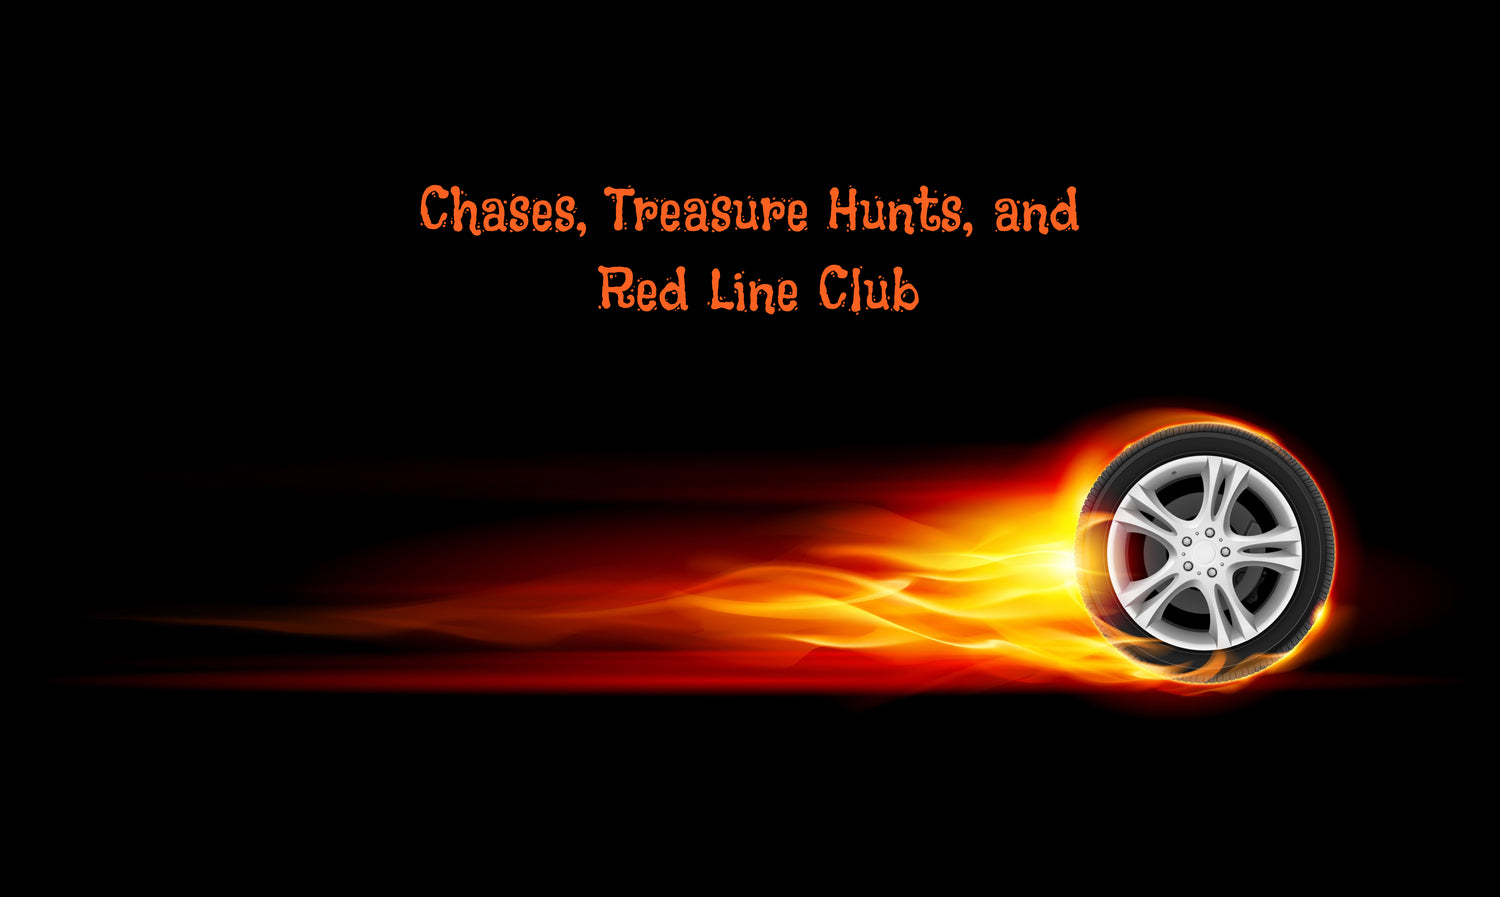 Chases, Treasure Hunts, and Red Line Club